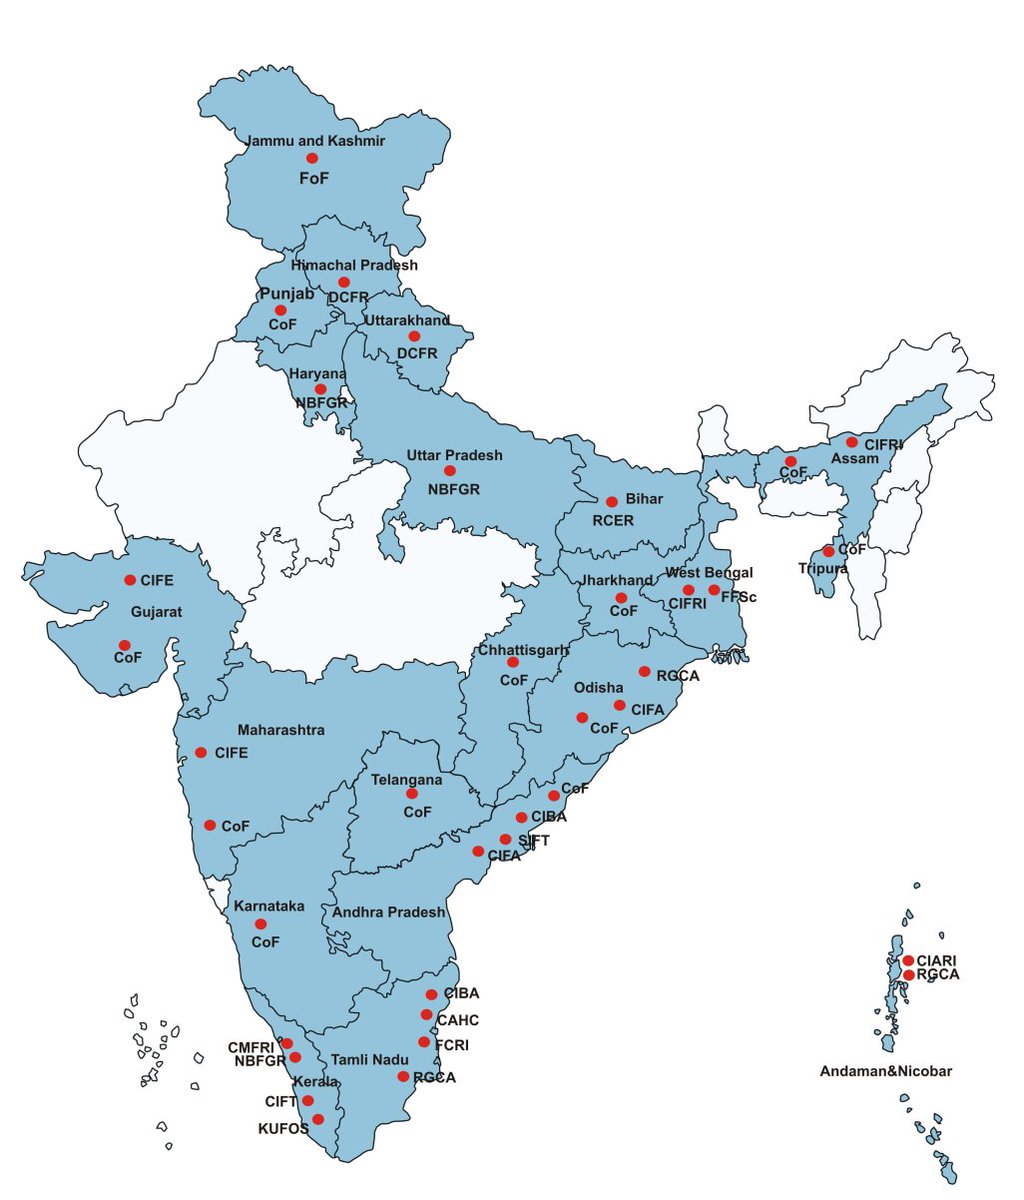 NFDB in collaboration with NBFGR developed a strong network of #AquaticAnimalHealth Laboratories with scientific manpower for surveillance & aquatic animal epidemiology tools in 21 States/UTs under National Surveillance Programme for Aquatic Animal Diseases @icar_fish #fishhealth